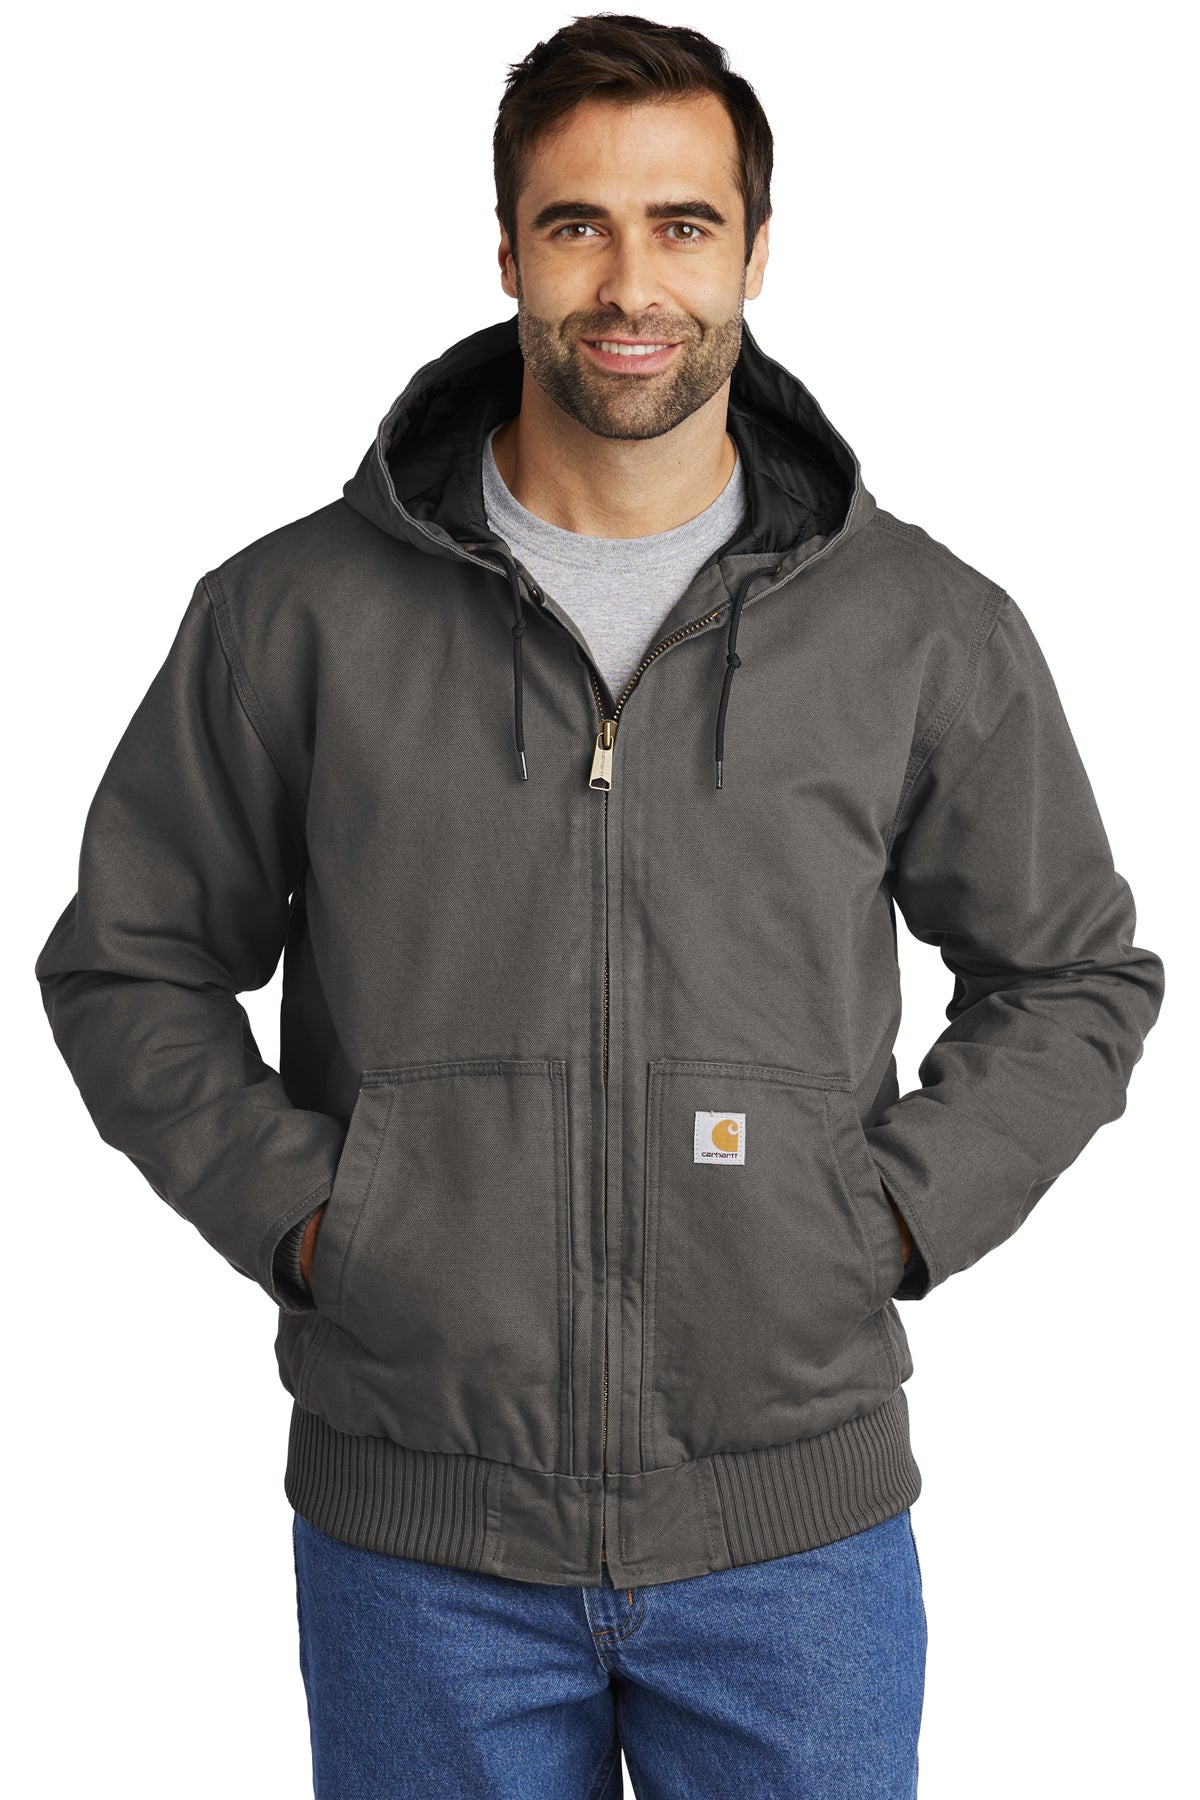 Carhartt® Washed Duck Active Jac – InTandem Promotions